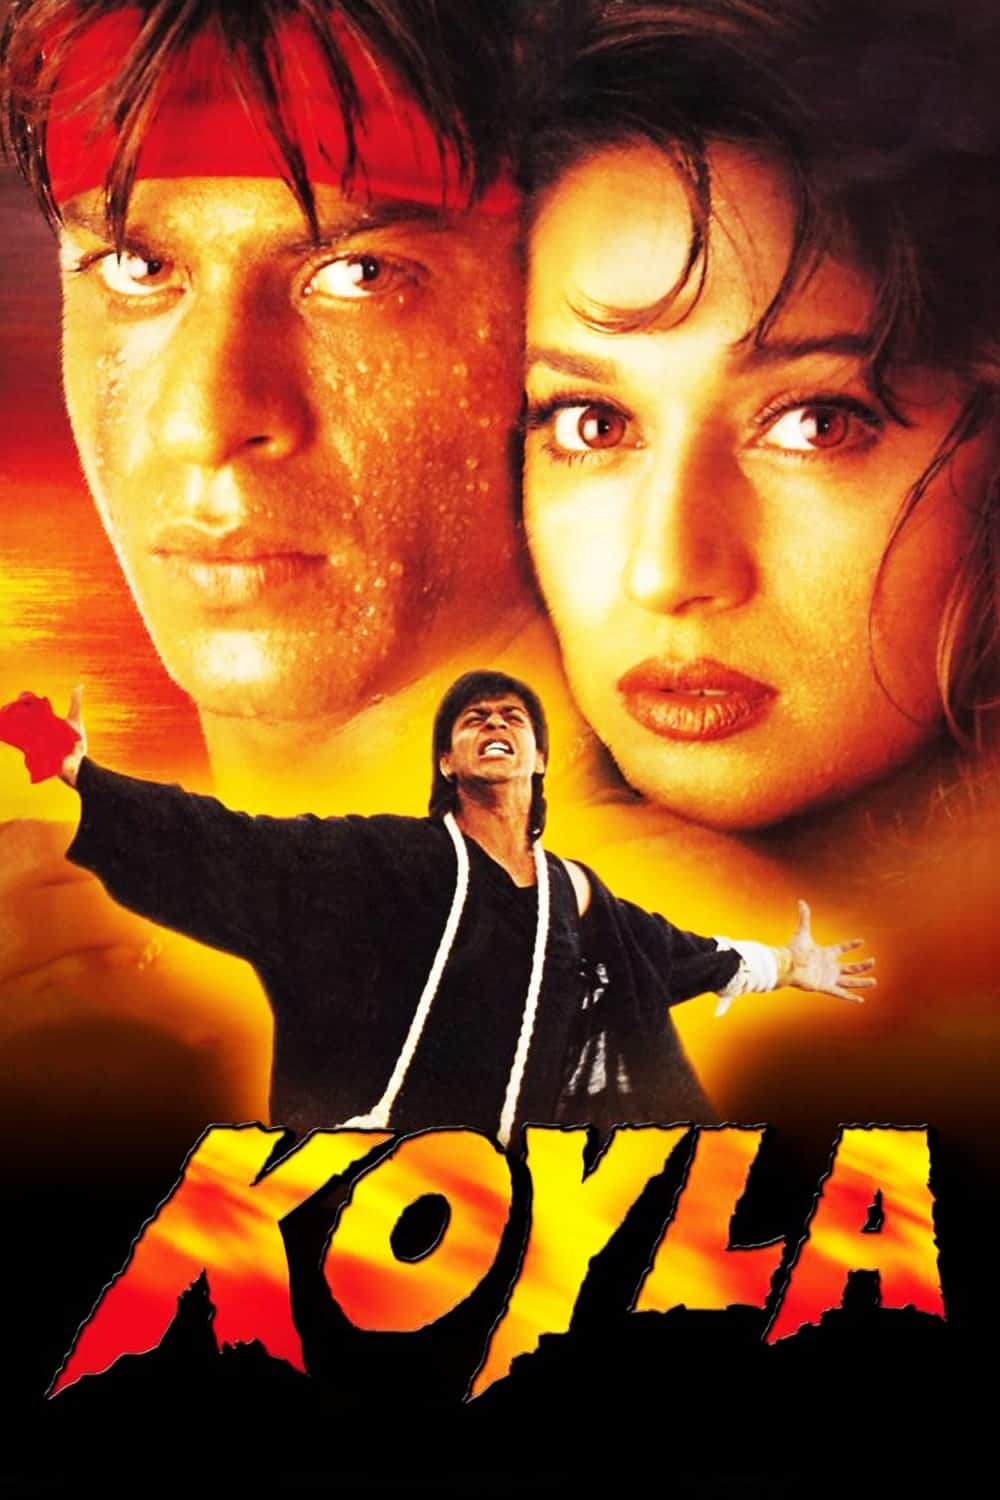 Poster for the movie "Koyla"